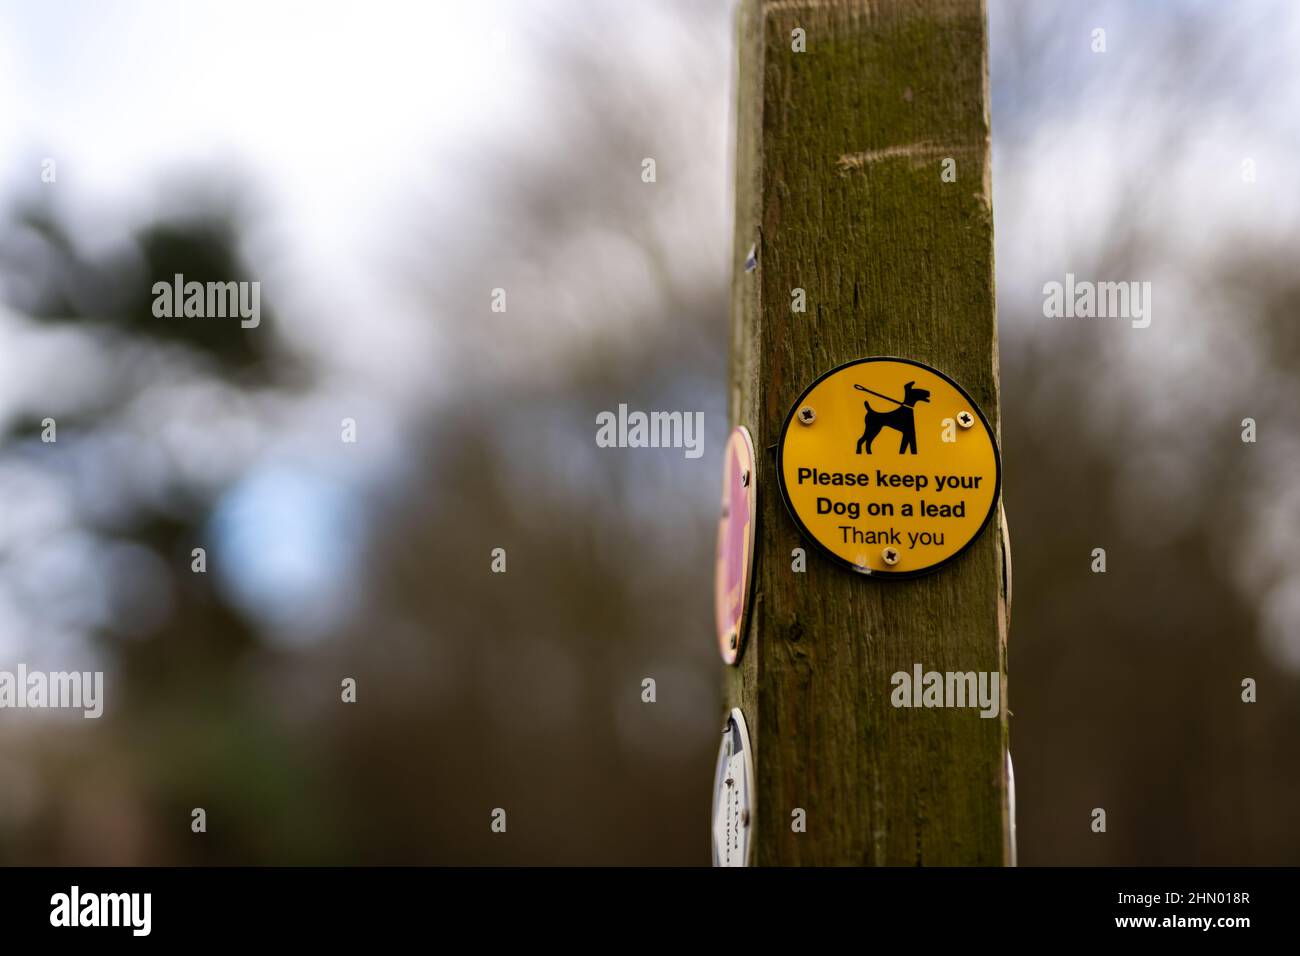 Please keep your dog on a lead information sign in the rural countryside to protect wildlife, farmers livestock and other people walking in the area f Stock Photo